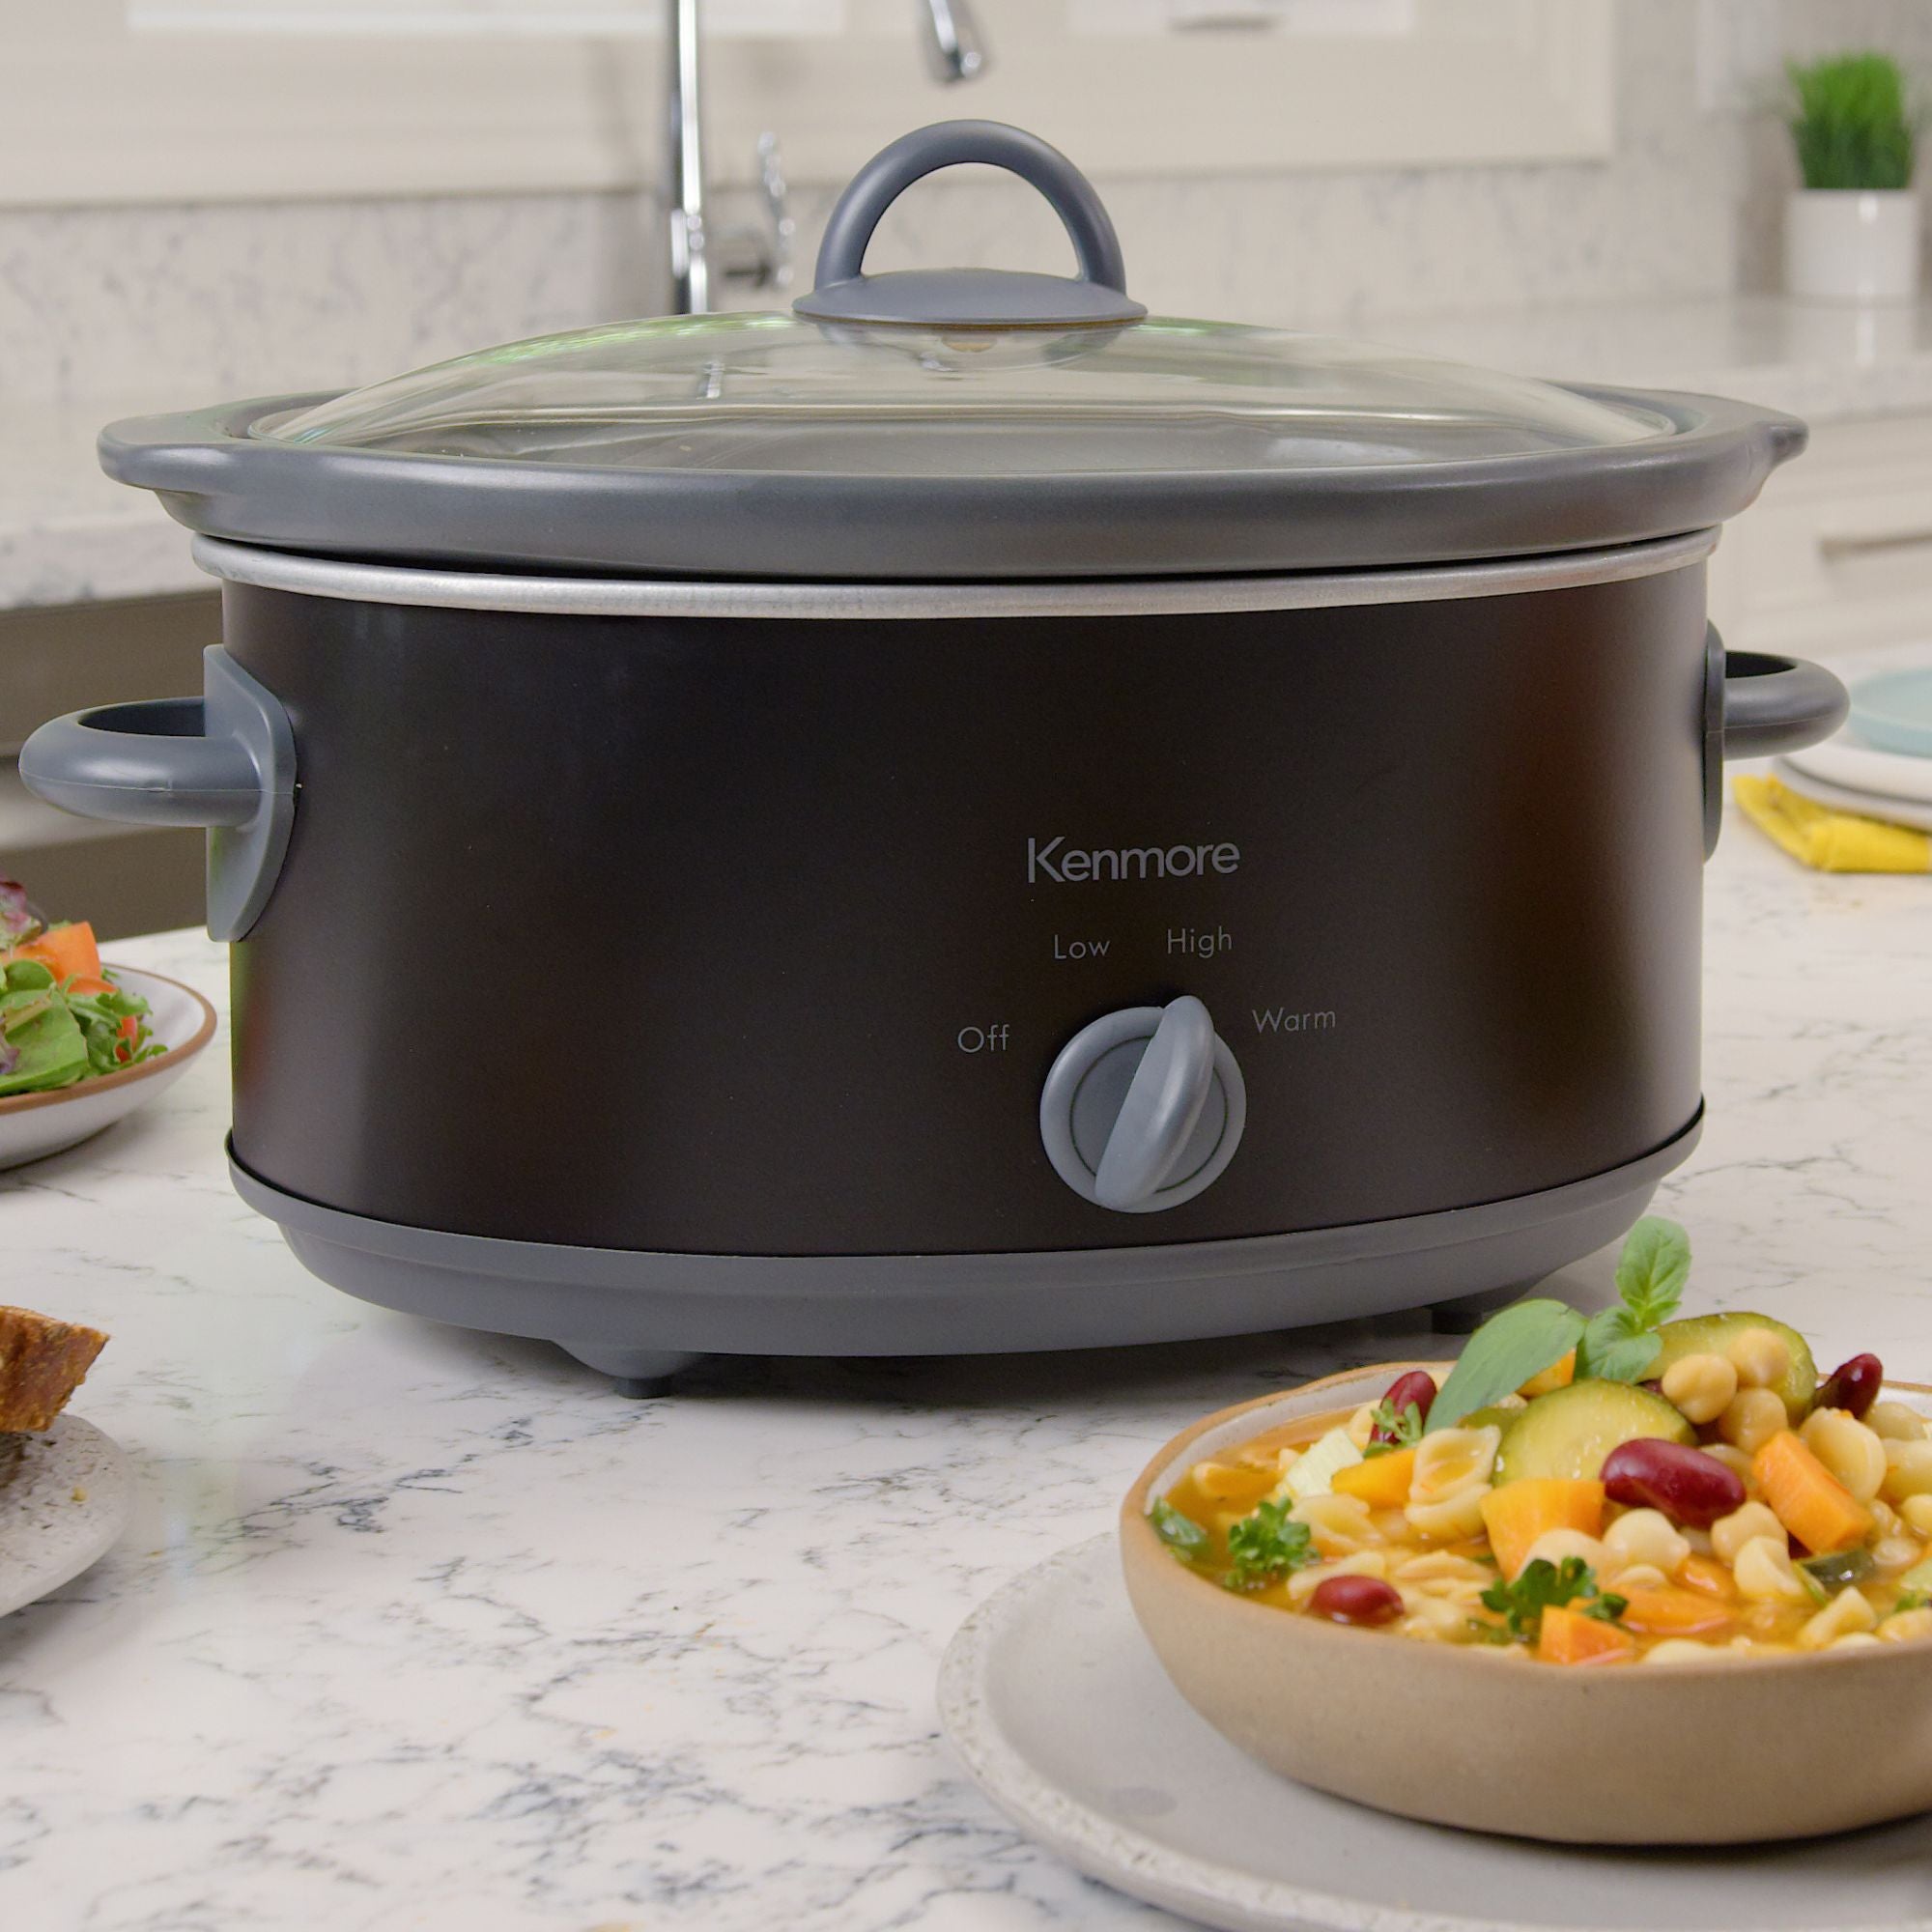 Kenmore 5 qt slow cooker on a white marble countertop surrounded by plates of food 